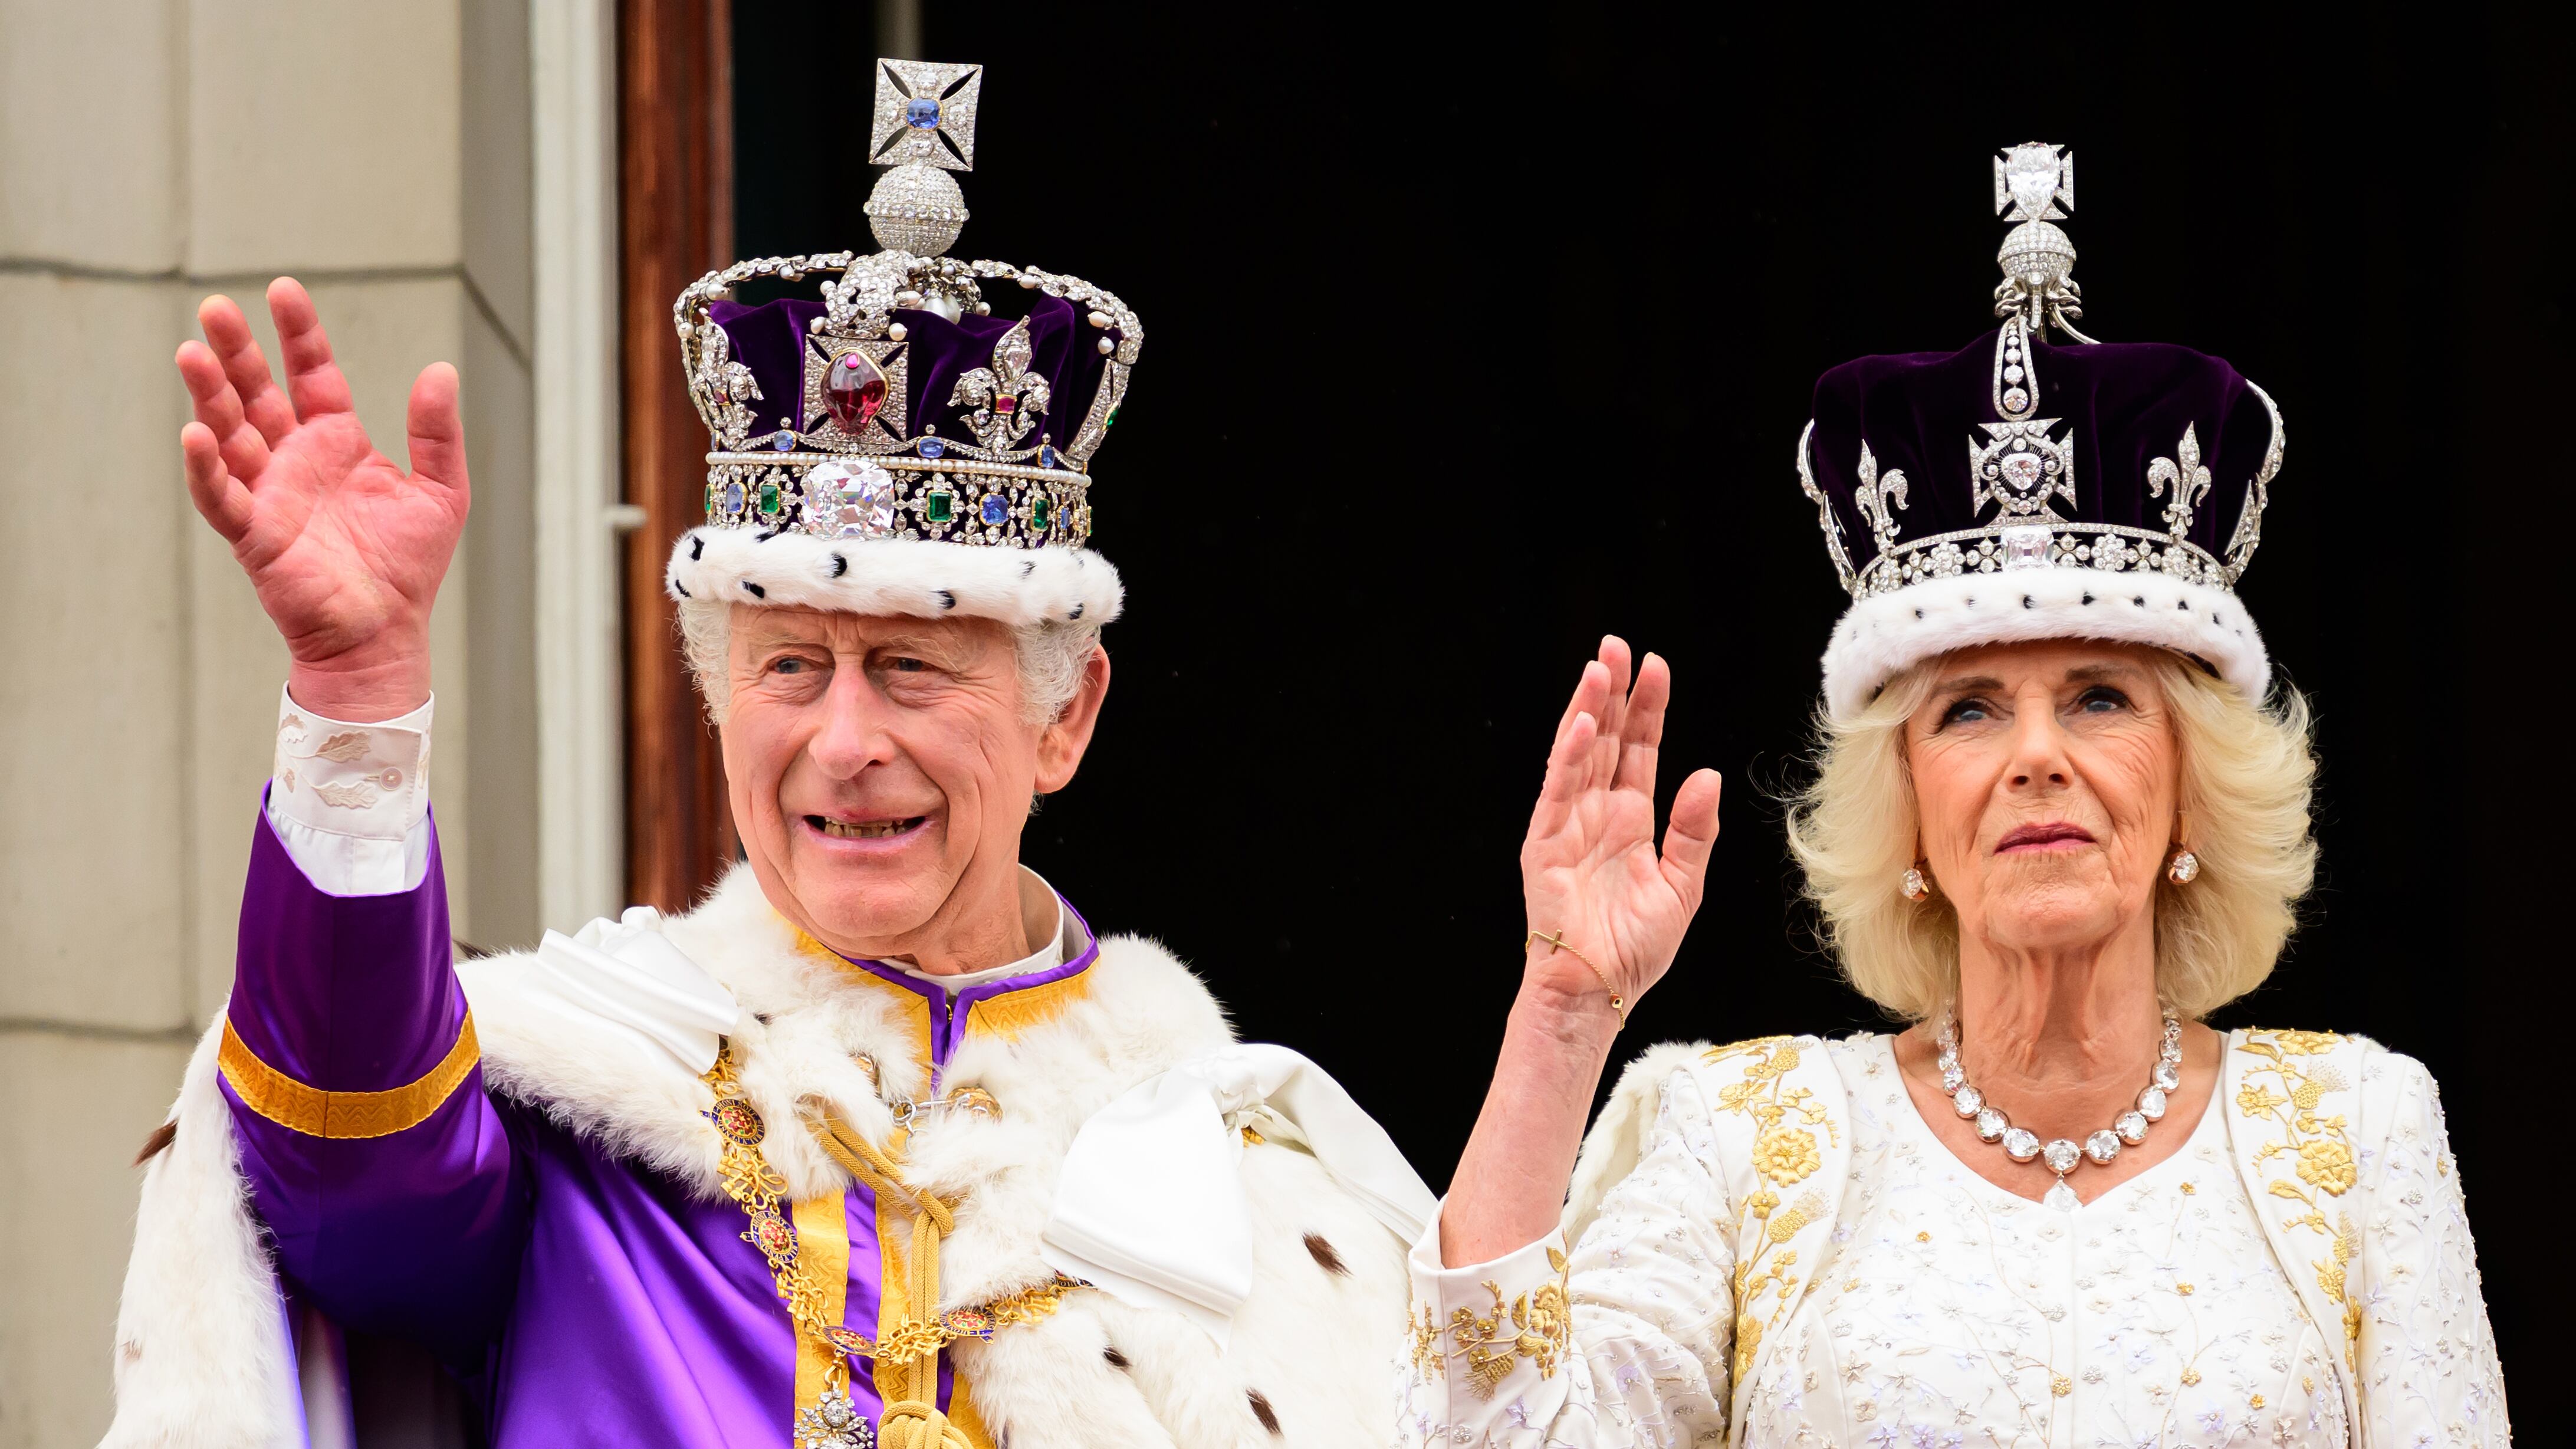 The coronation of the King and Queen was among the top questions asked of Alexa virtual assistants in the UK in 2023